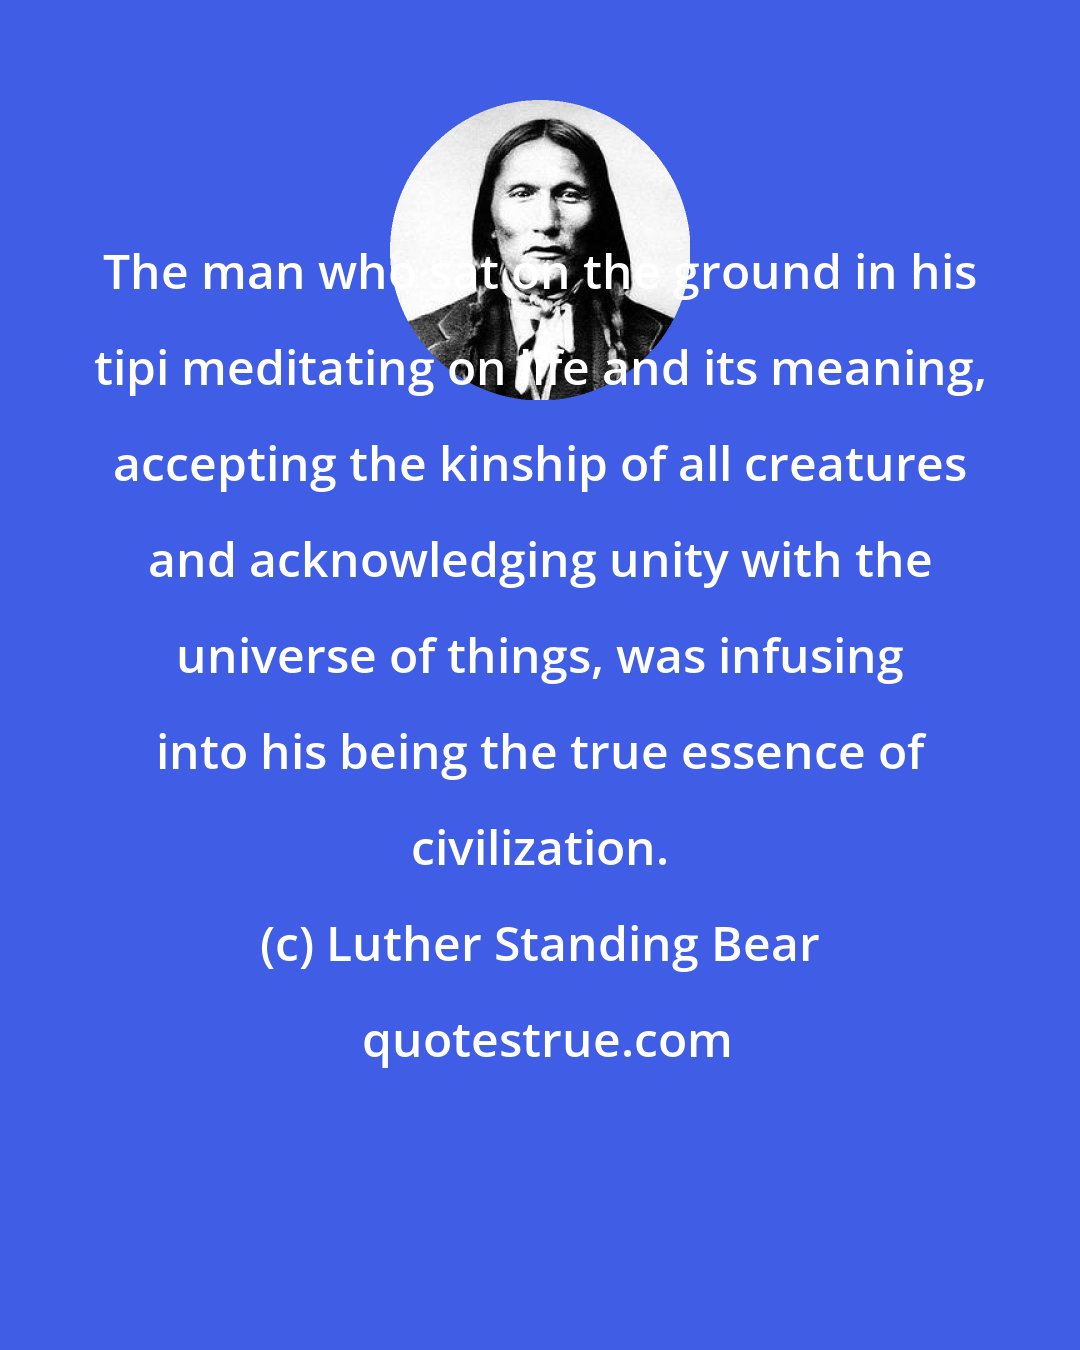 Luther Standing Bear: The man who sat on the ground in his tipi meditating on life and its meaning, accepting the kinship of all creatures and acknowledging unity with the universe of things, was infusing into his being the true essence of civilization.